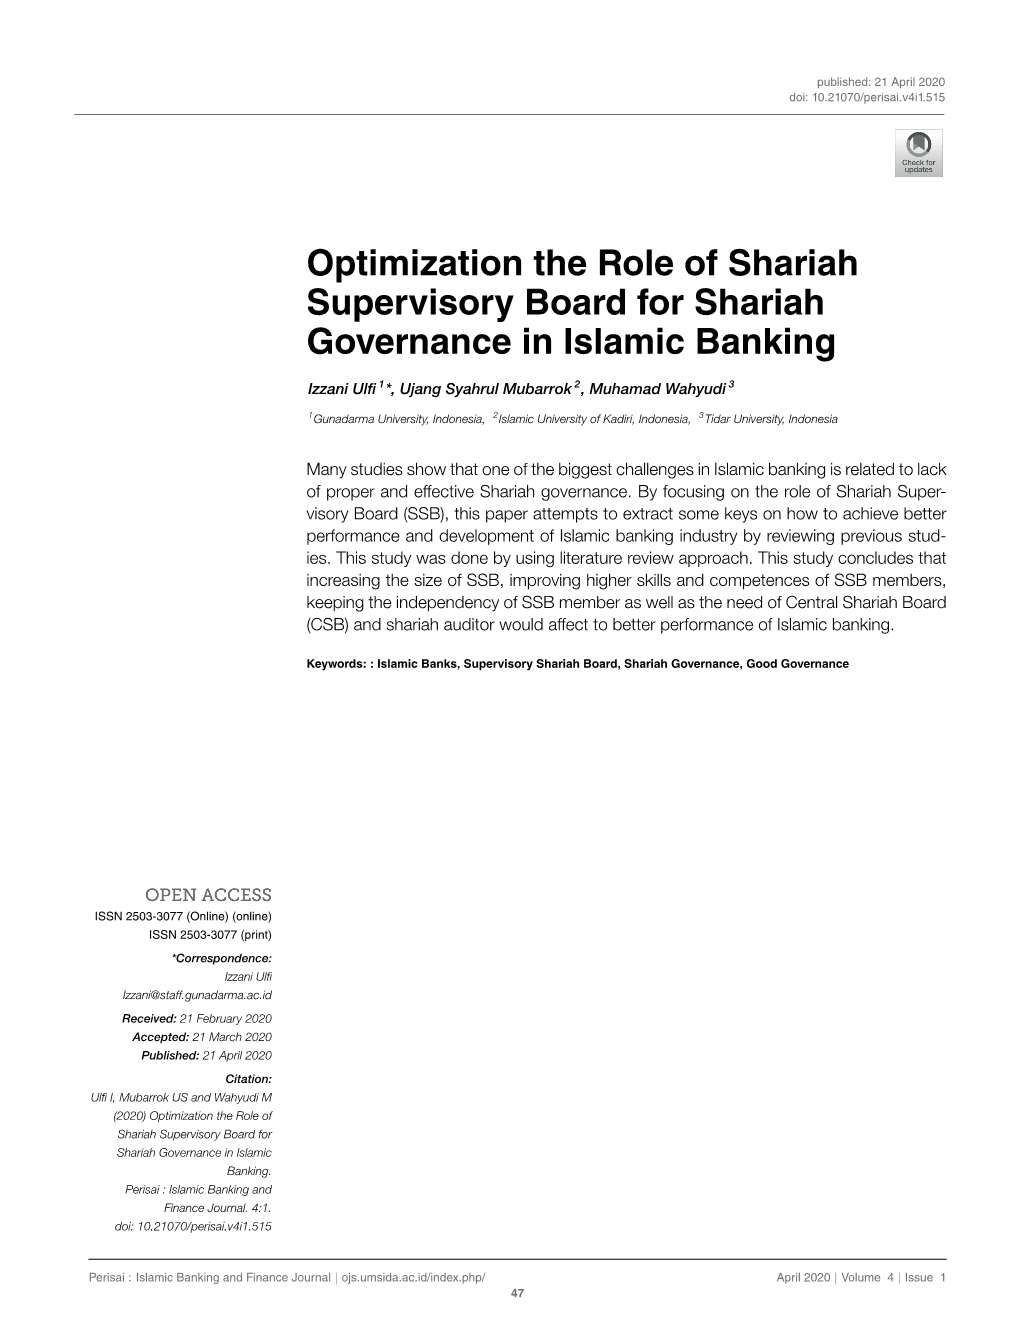 Optimization the Role of Shariah Supervisory Board for Shariah Governance in Islamic Banking